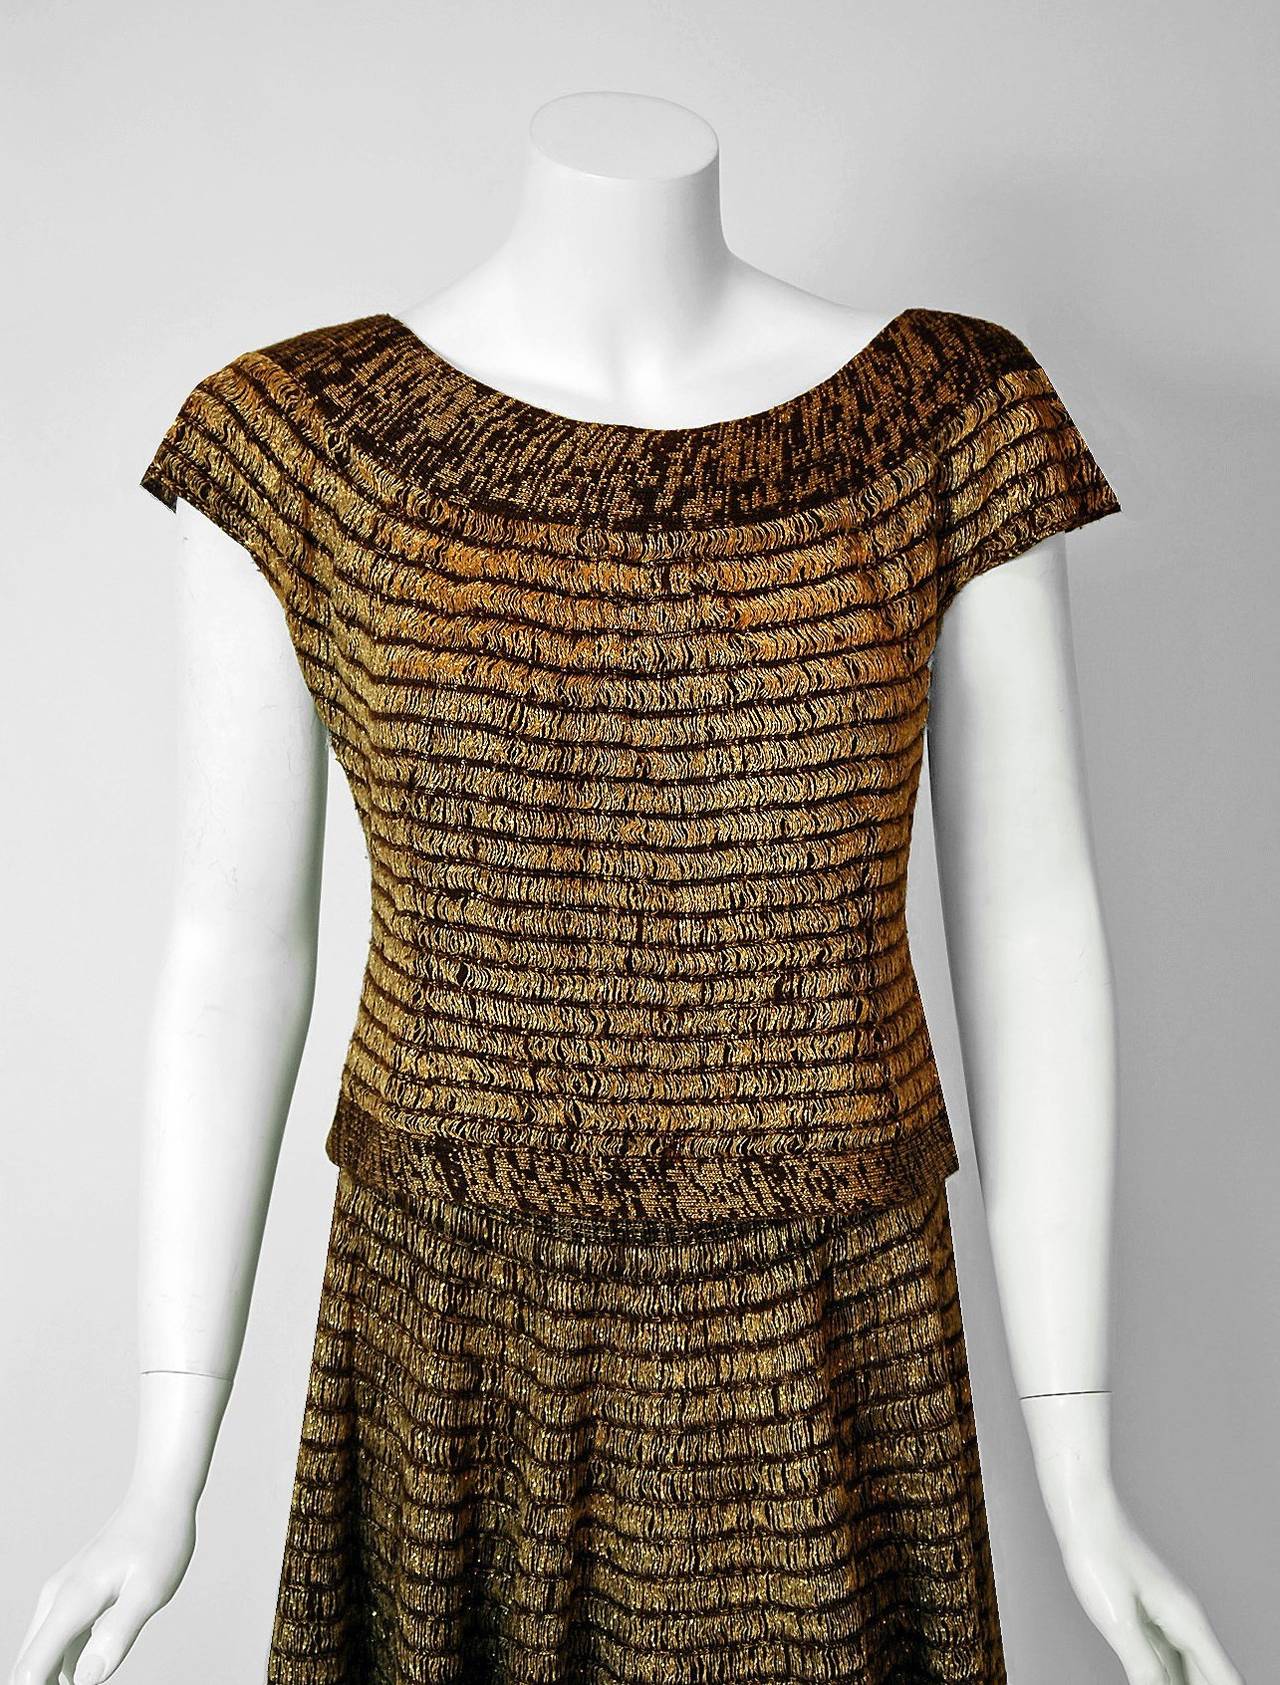 1940's Austrian hand-knit stretch garments are in a class of their own. They are always fit to flatter the figure and have a certain timeless quality. This treasure has a fantastic metallic-gold striped shimmer worked into the rich chocolate brown